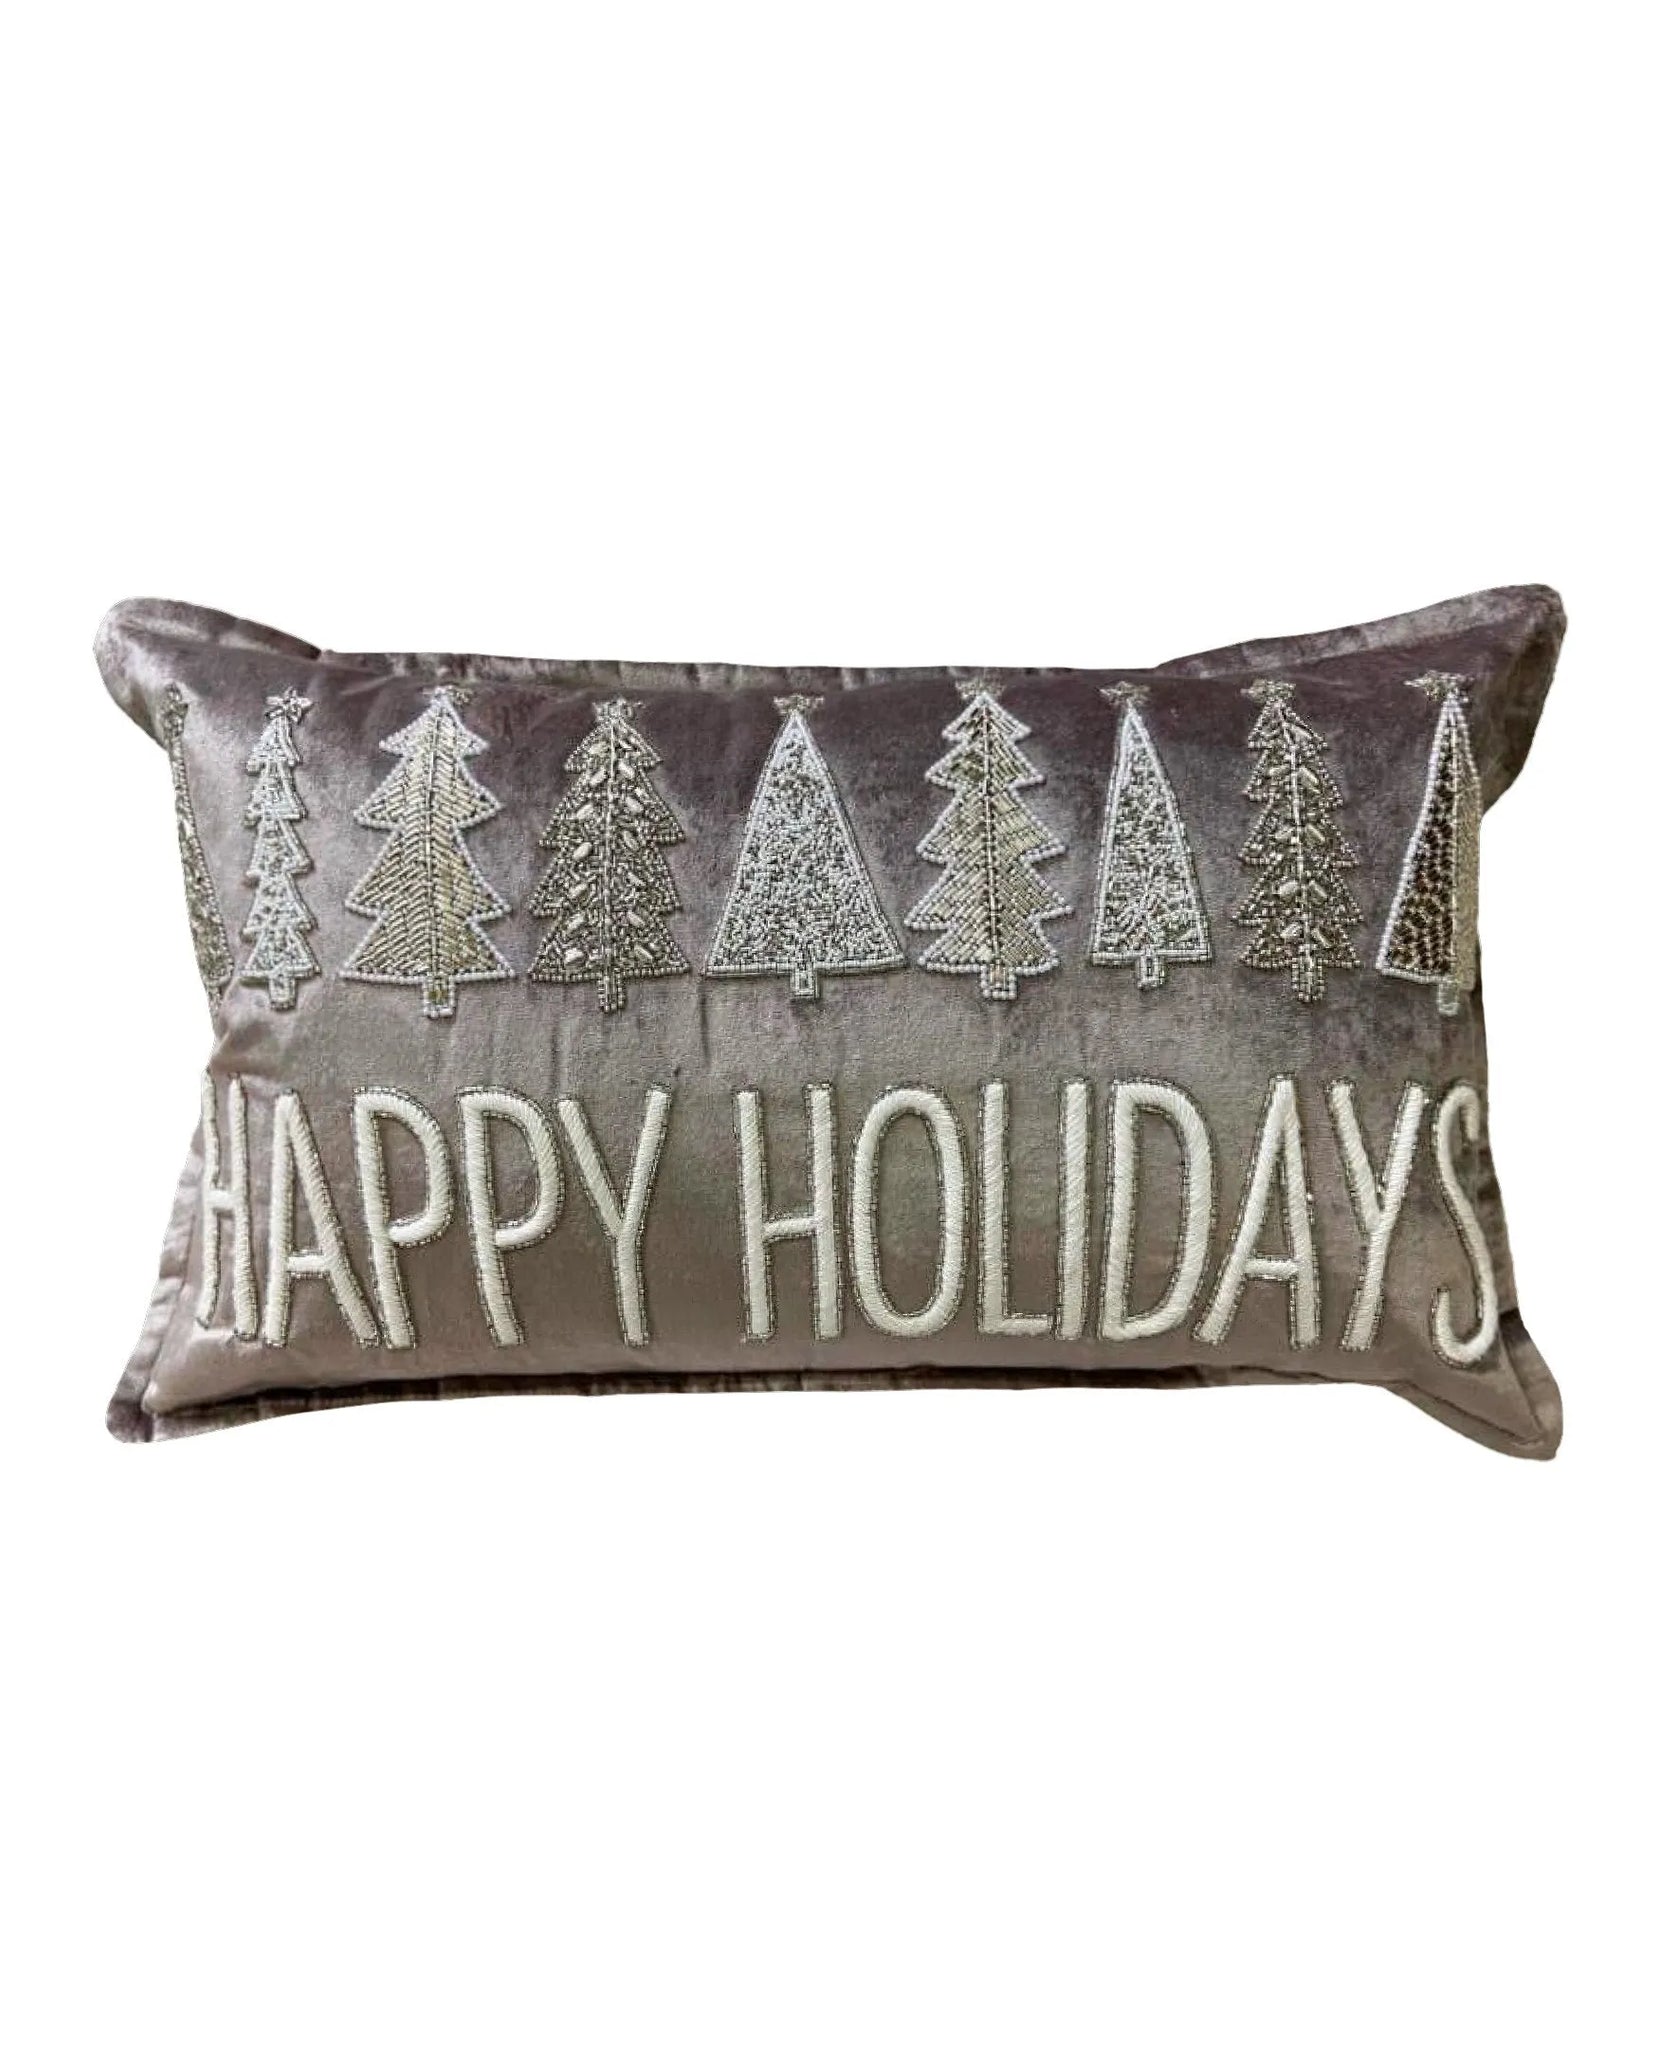 Happy Holidays Emroidery and Beaded Pillow, Grey - 14" x 24" home decor - Mod Lifestyles